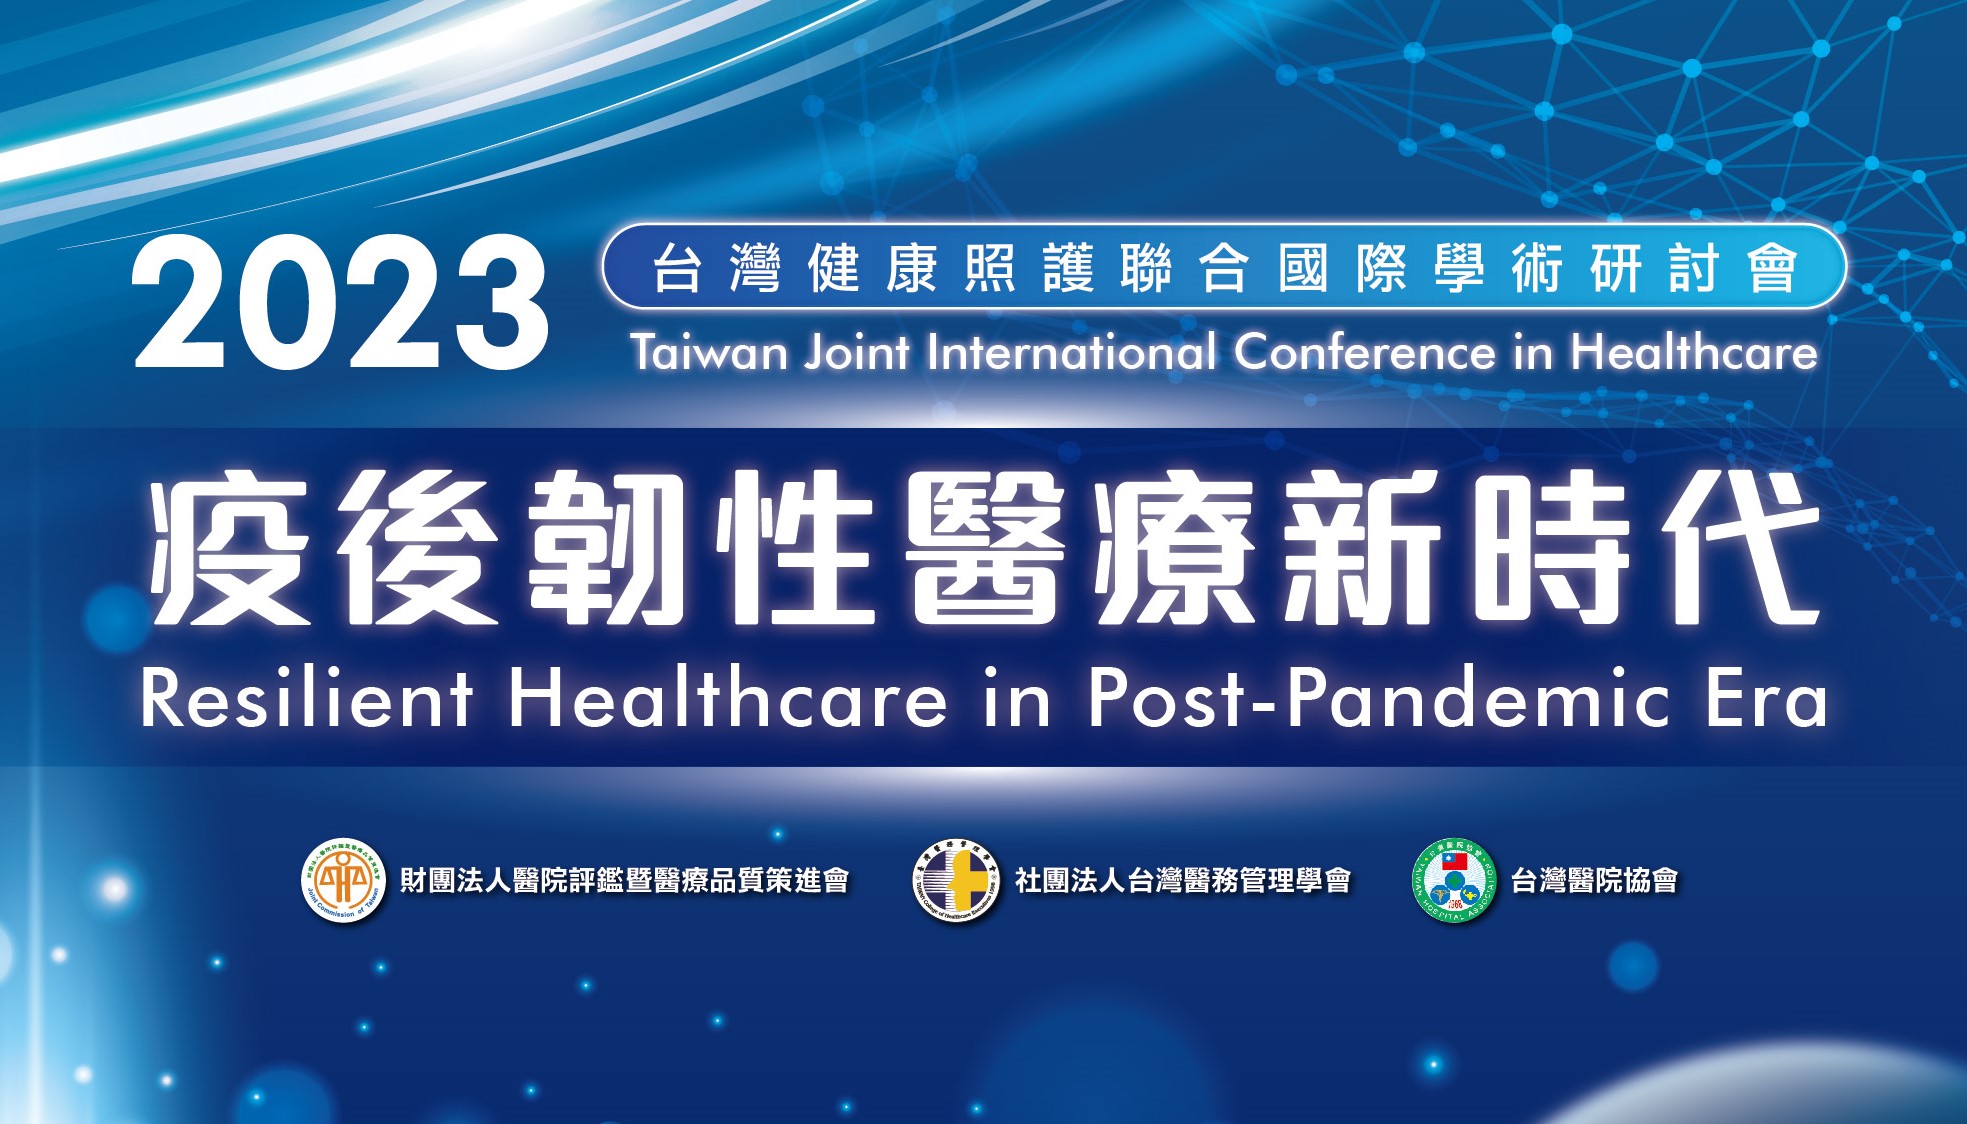 📢【2023 Taiwan Joint International Conference in Healthcare】Call for Papers！